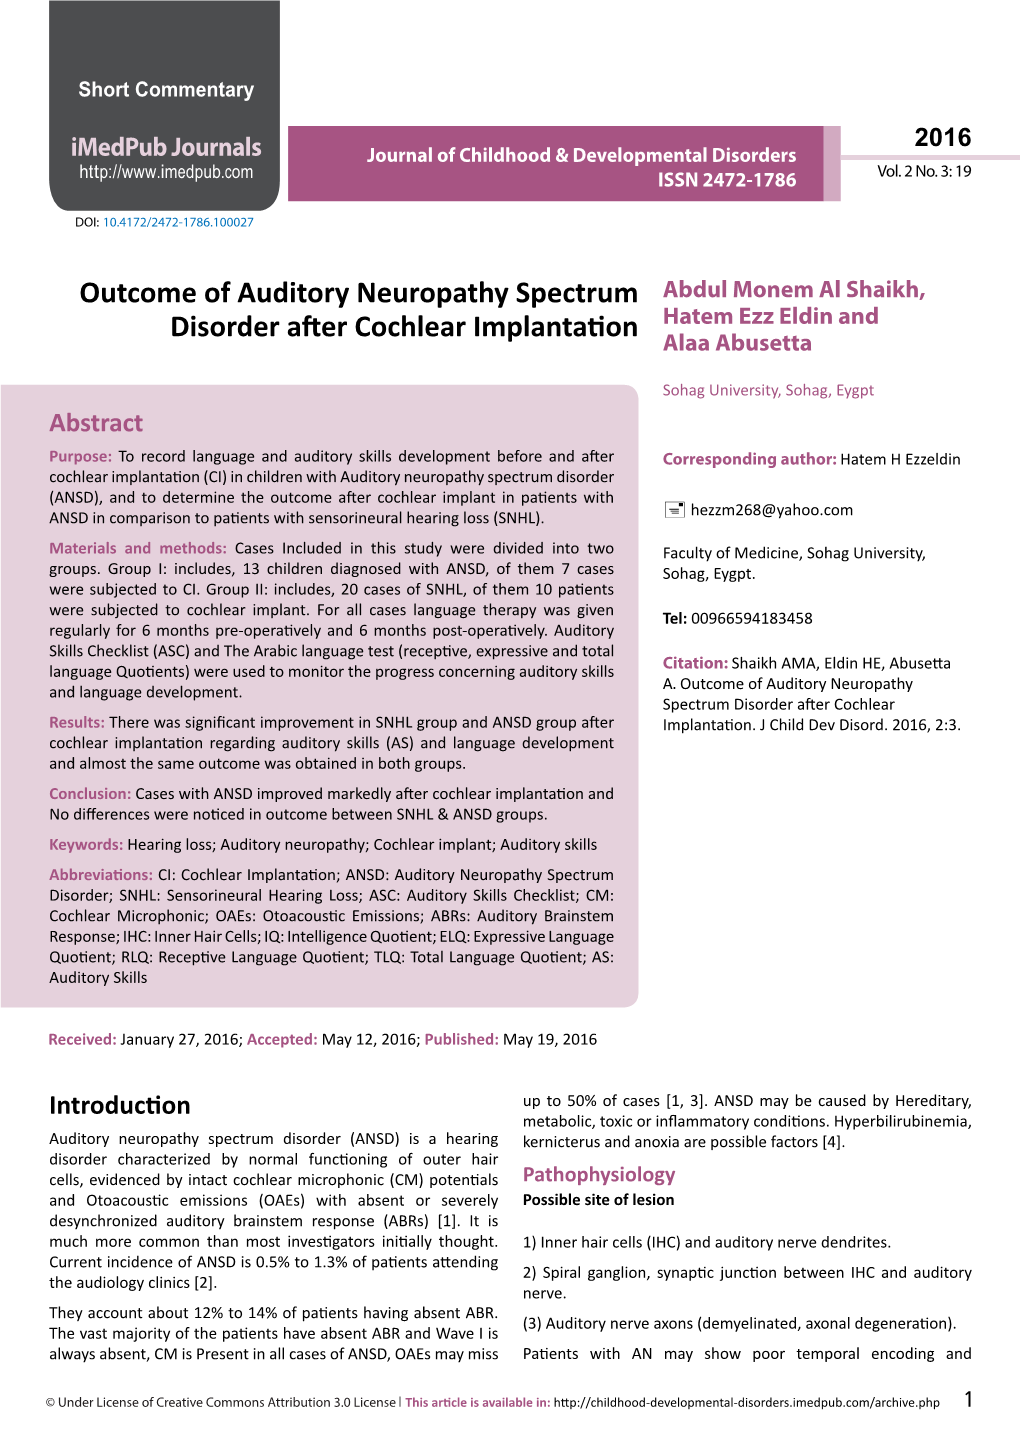 Outcome of Auditory Neuropathy Spectrum Disorder After Cochlear Results: There Was Significant Improvement in SNHL Group and ANSD Group After Implantation